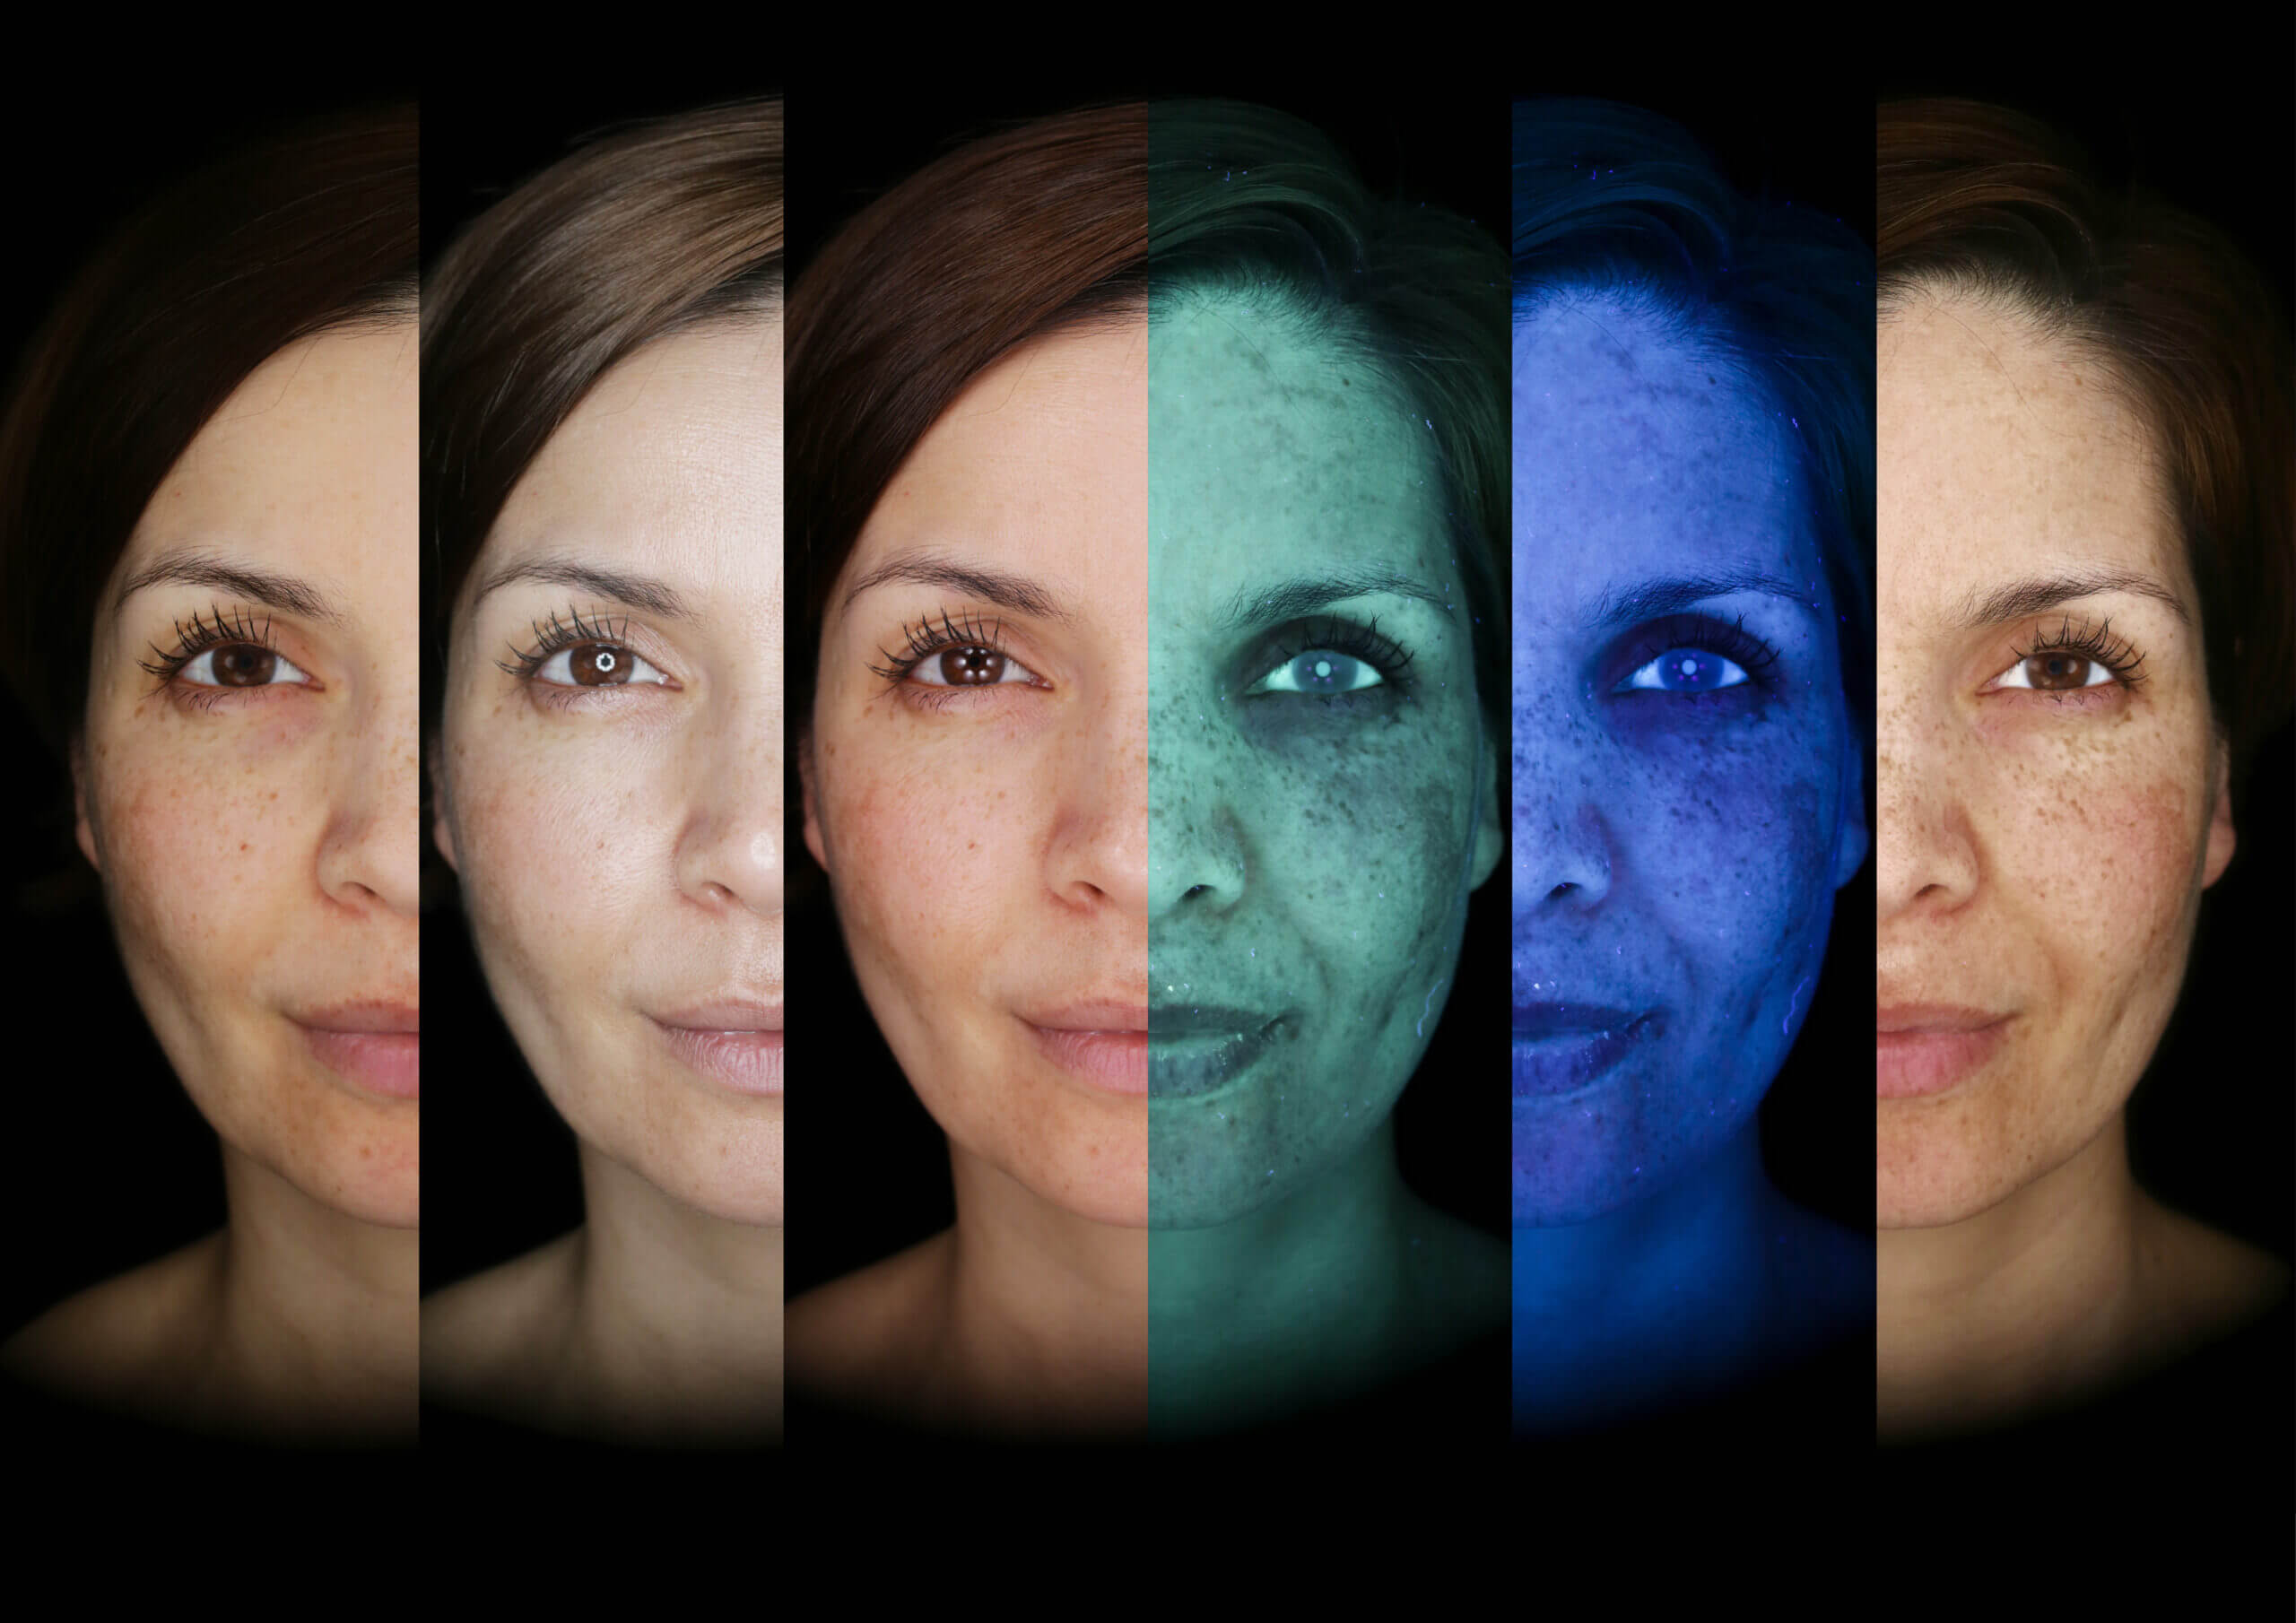 A photo of one woman's face split into may sections. Each section utilized a different OBSERV lighmode